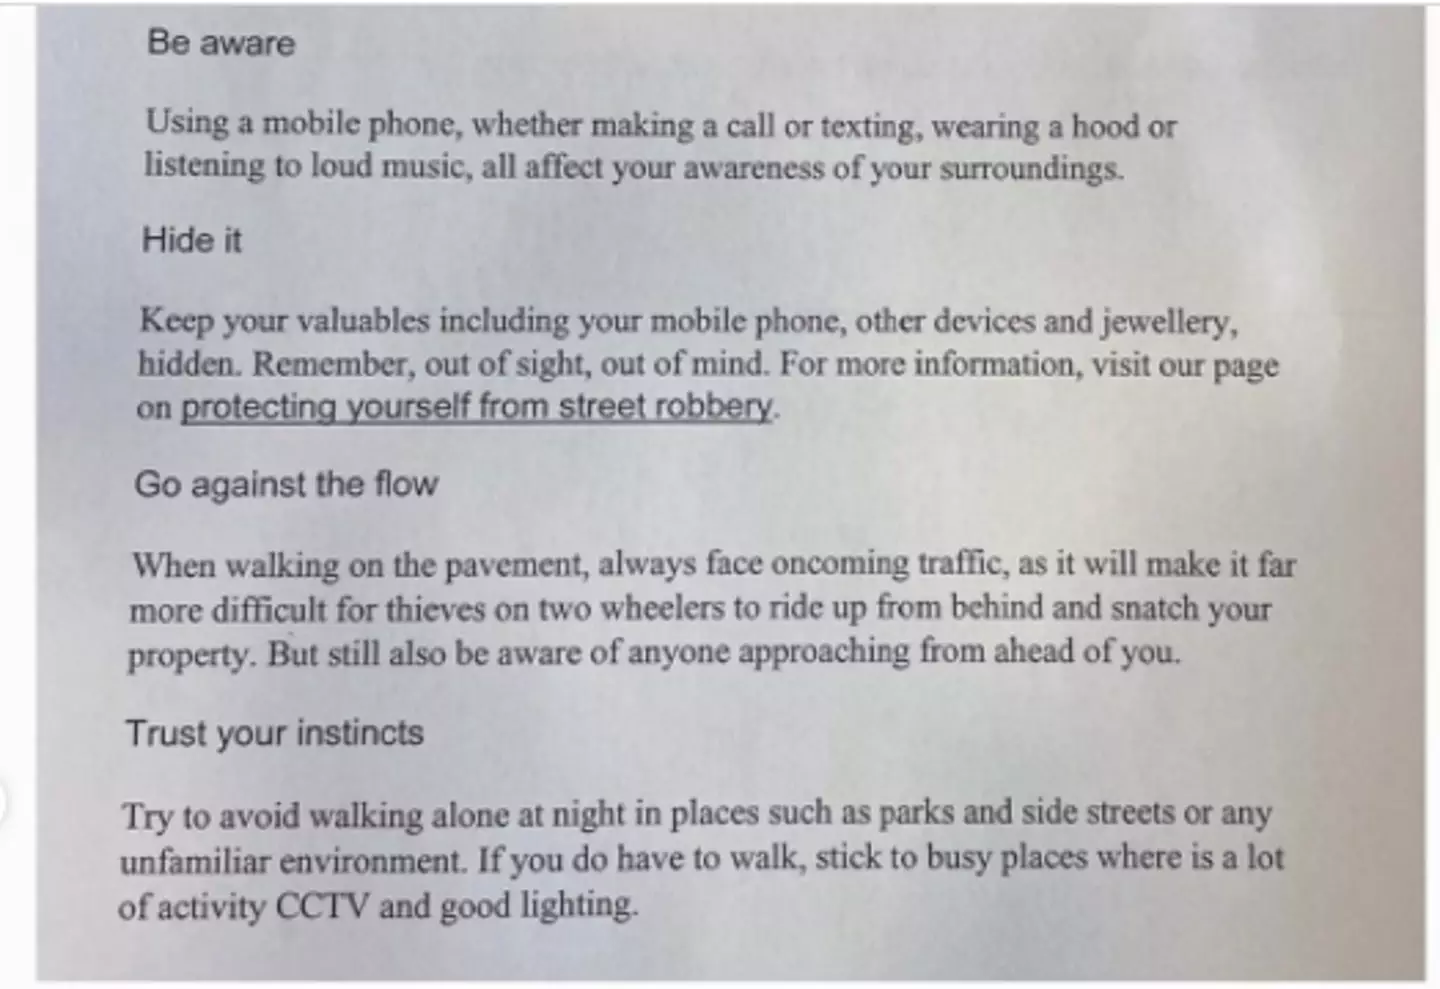 Safety leaflets are reportedly being handed out (